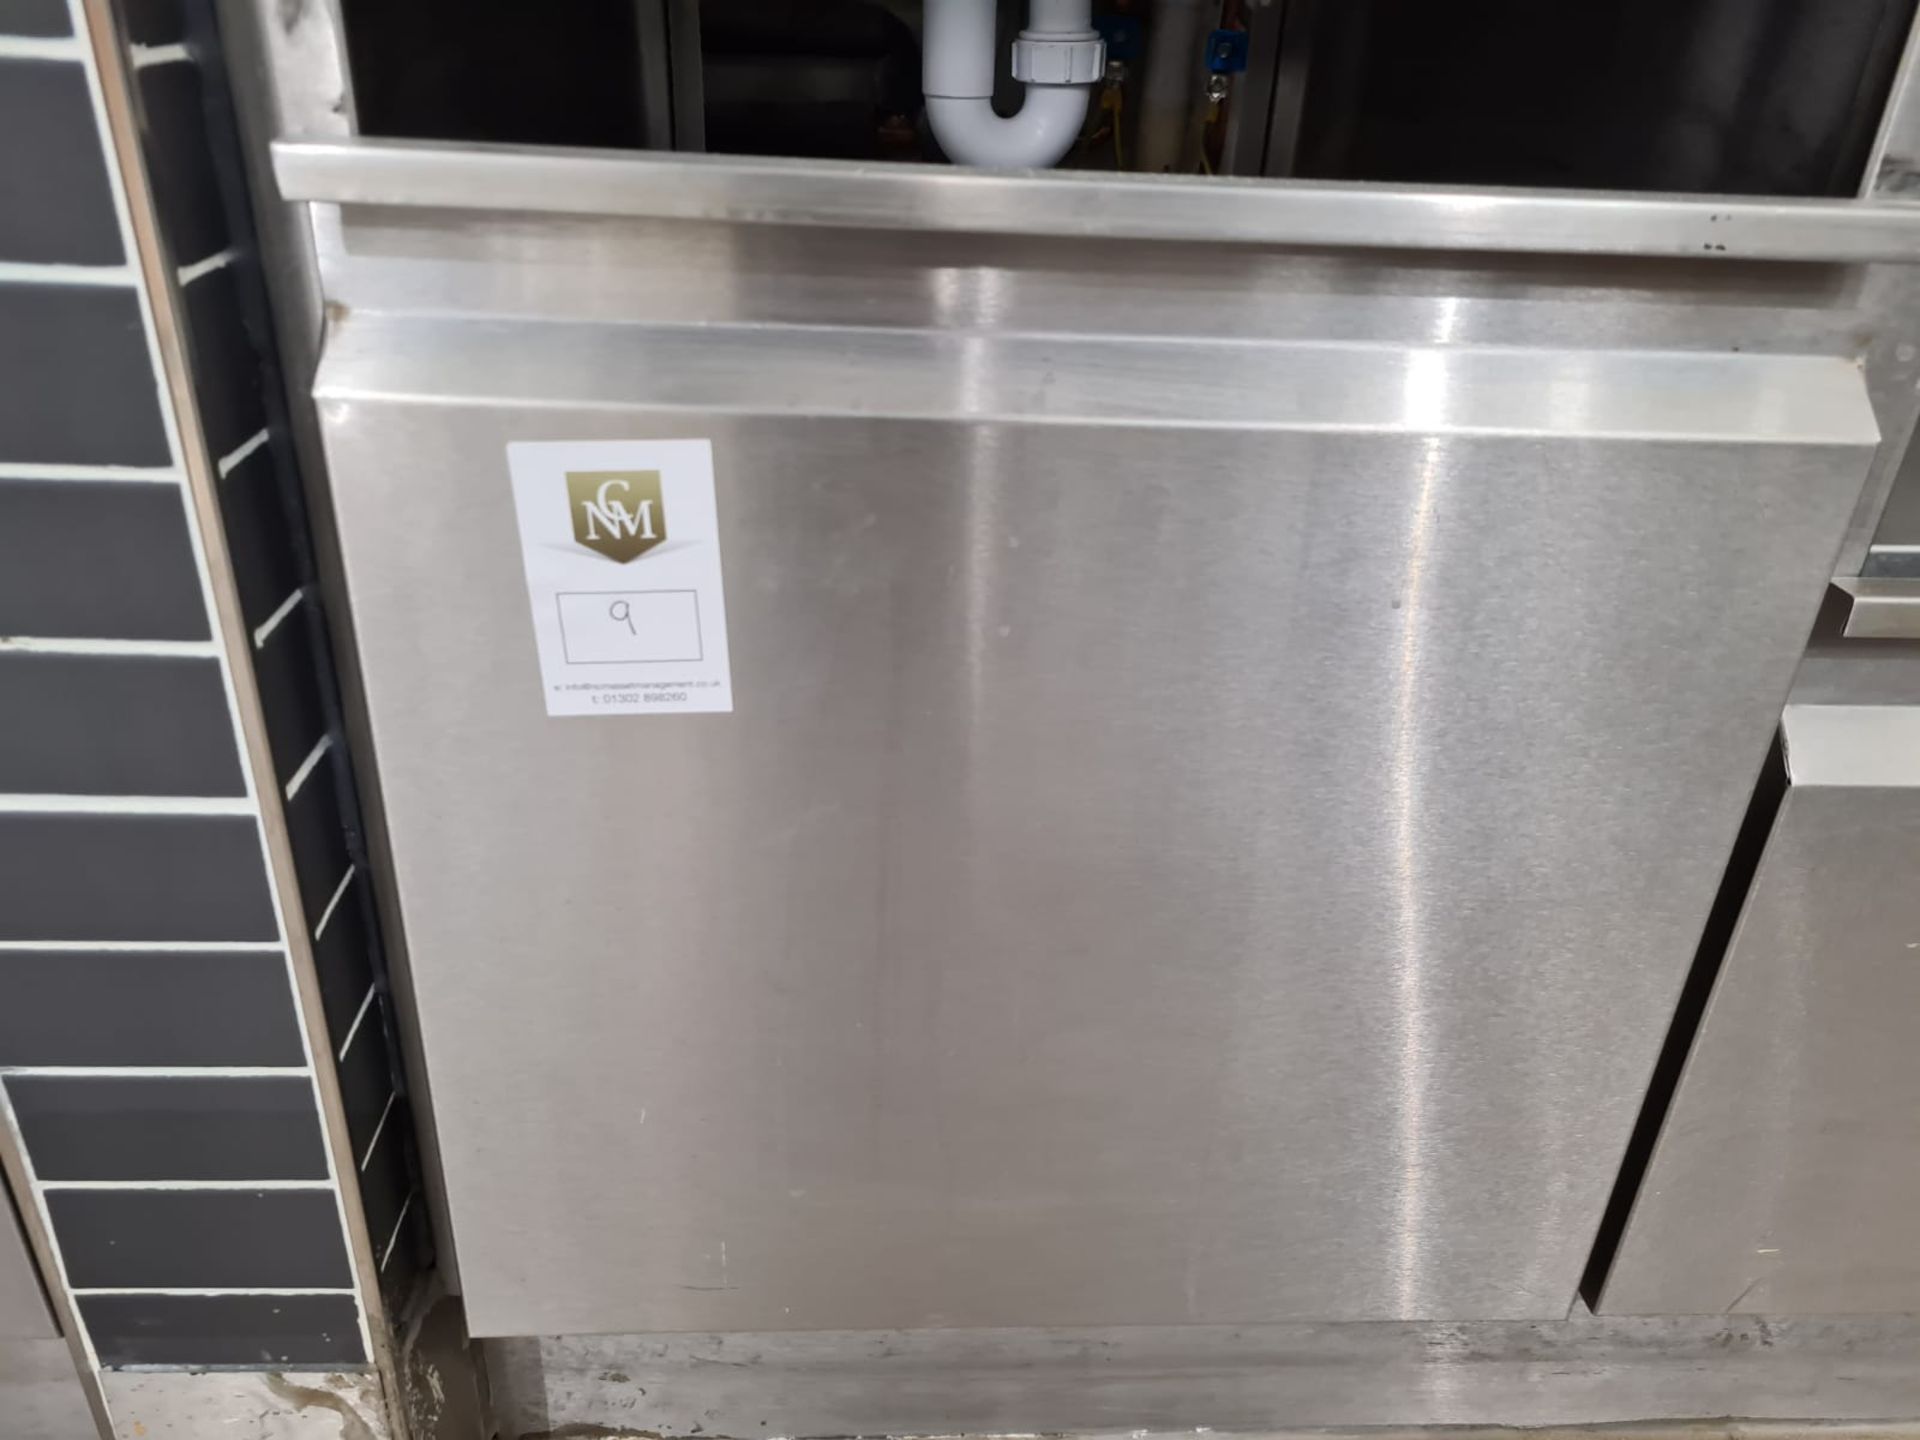 Stainless Steel Counter Top Storage Unit - Image 10 of 10